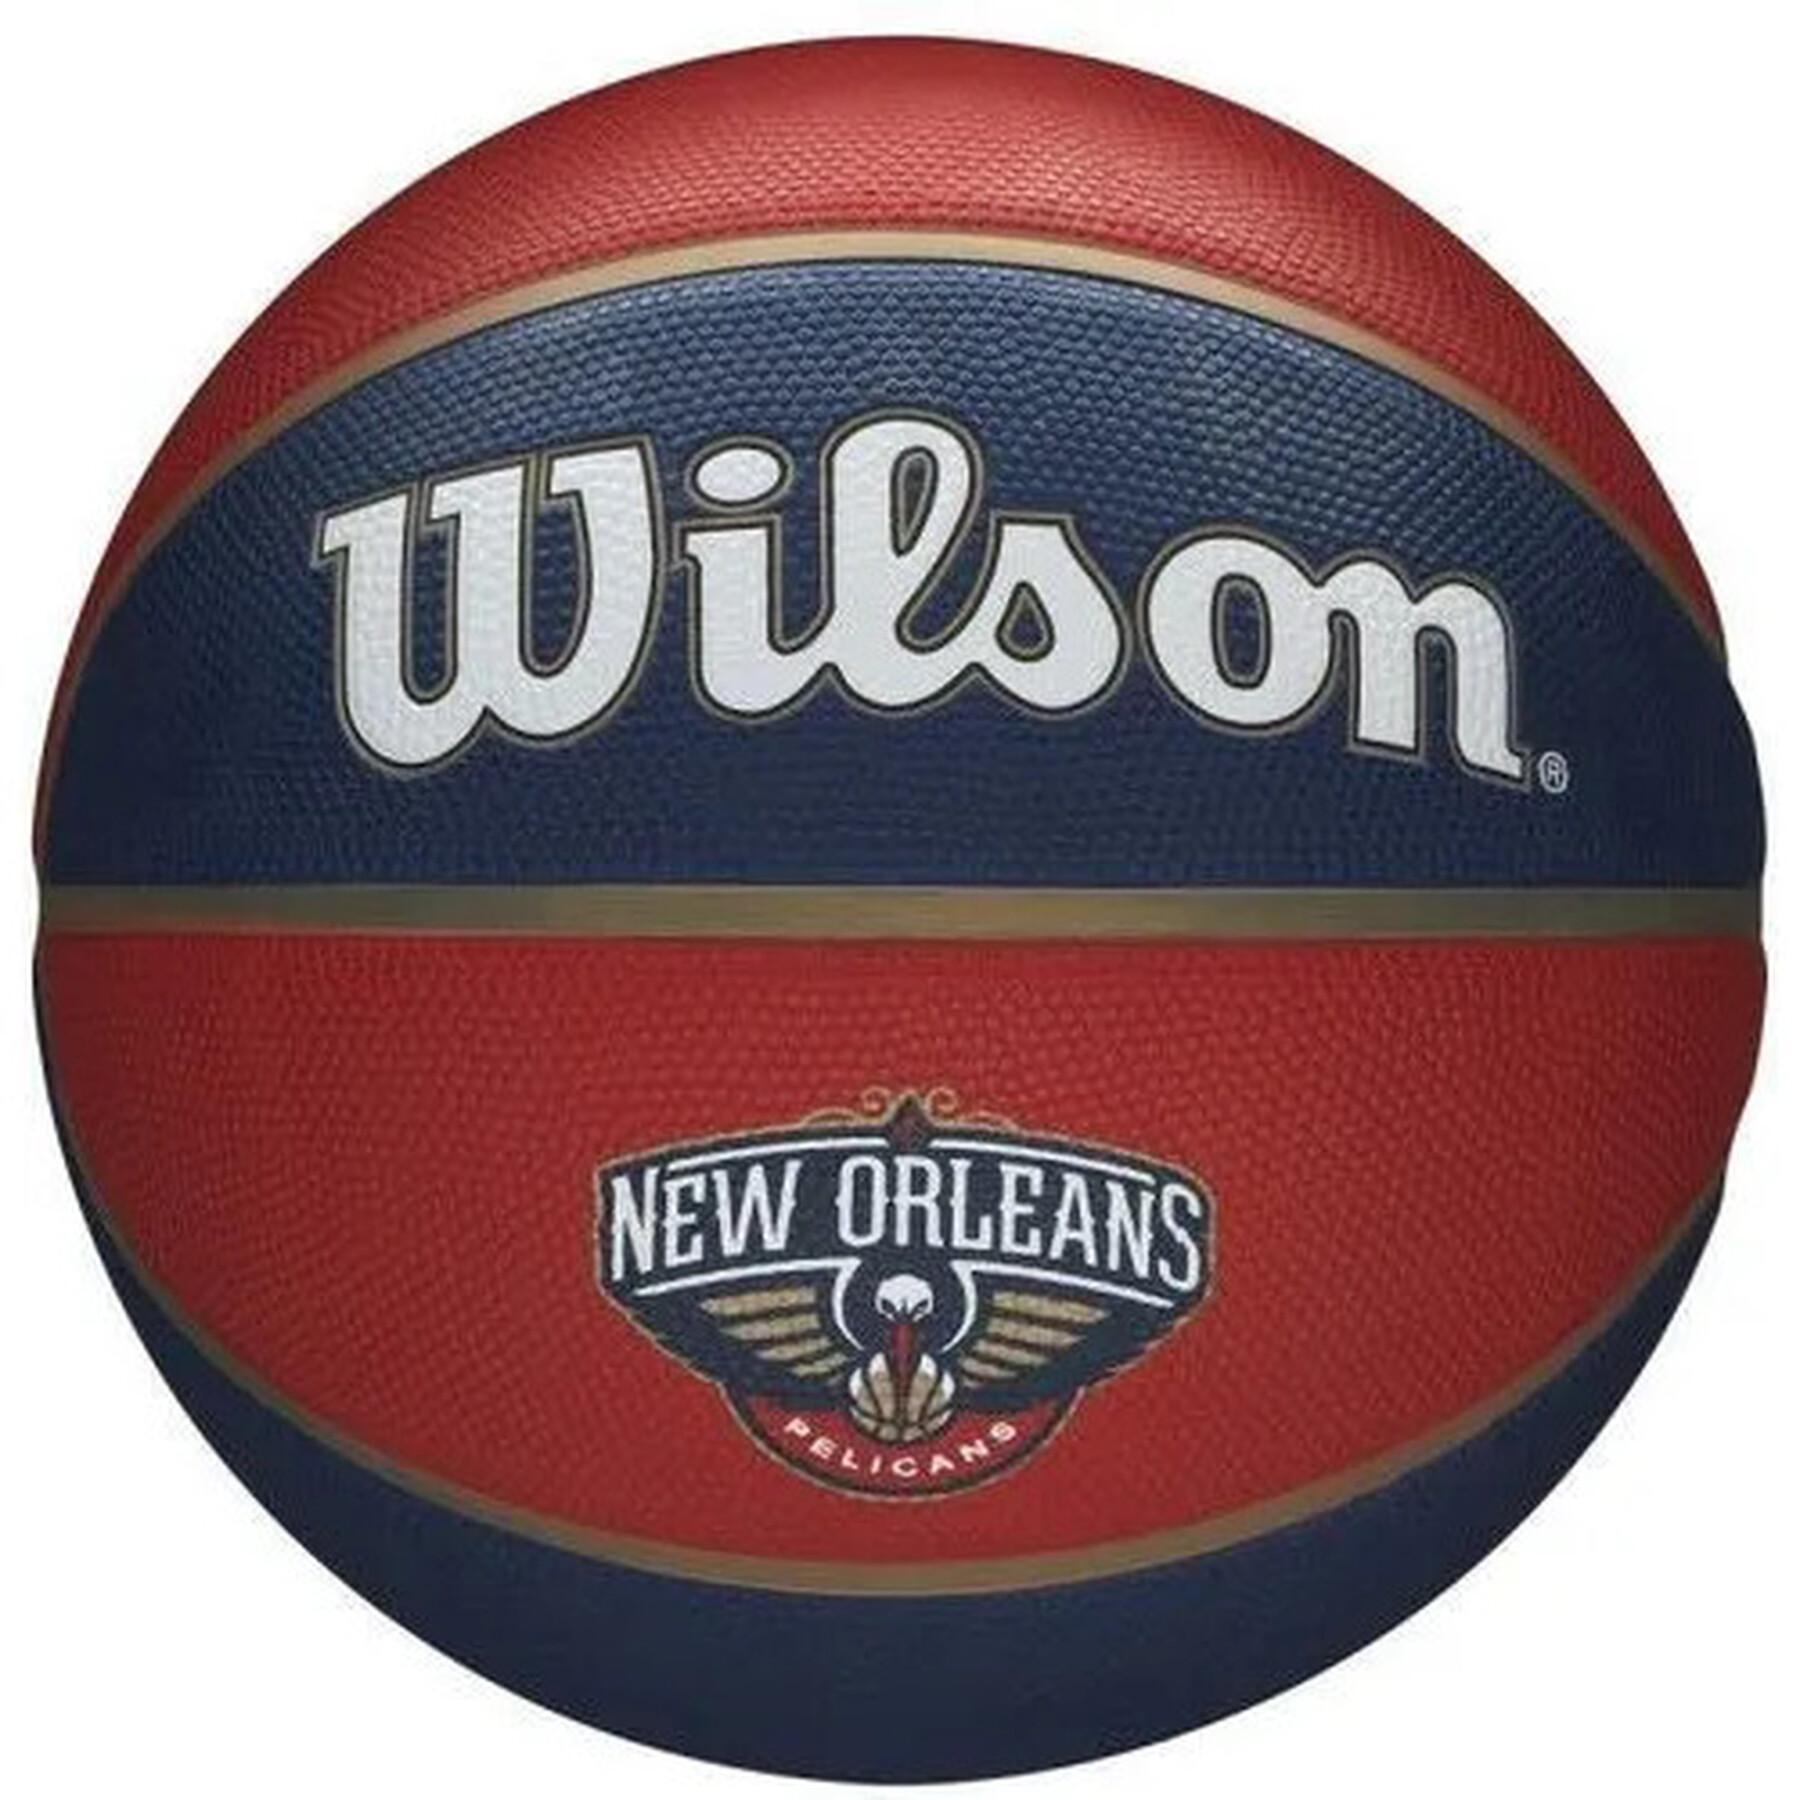 Basketball NBA Tribut e New Orleans Pelicans